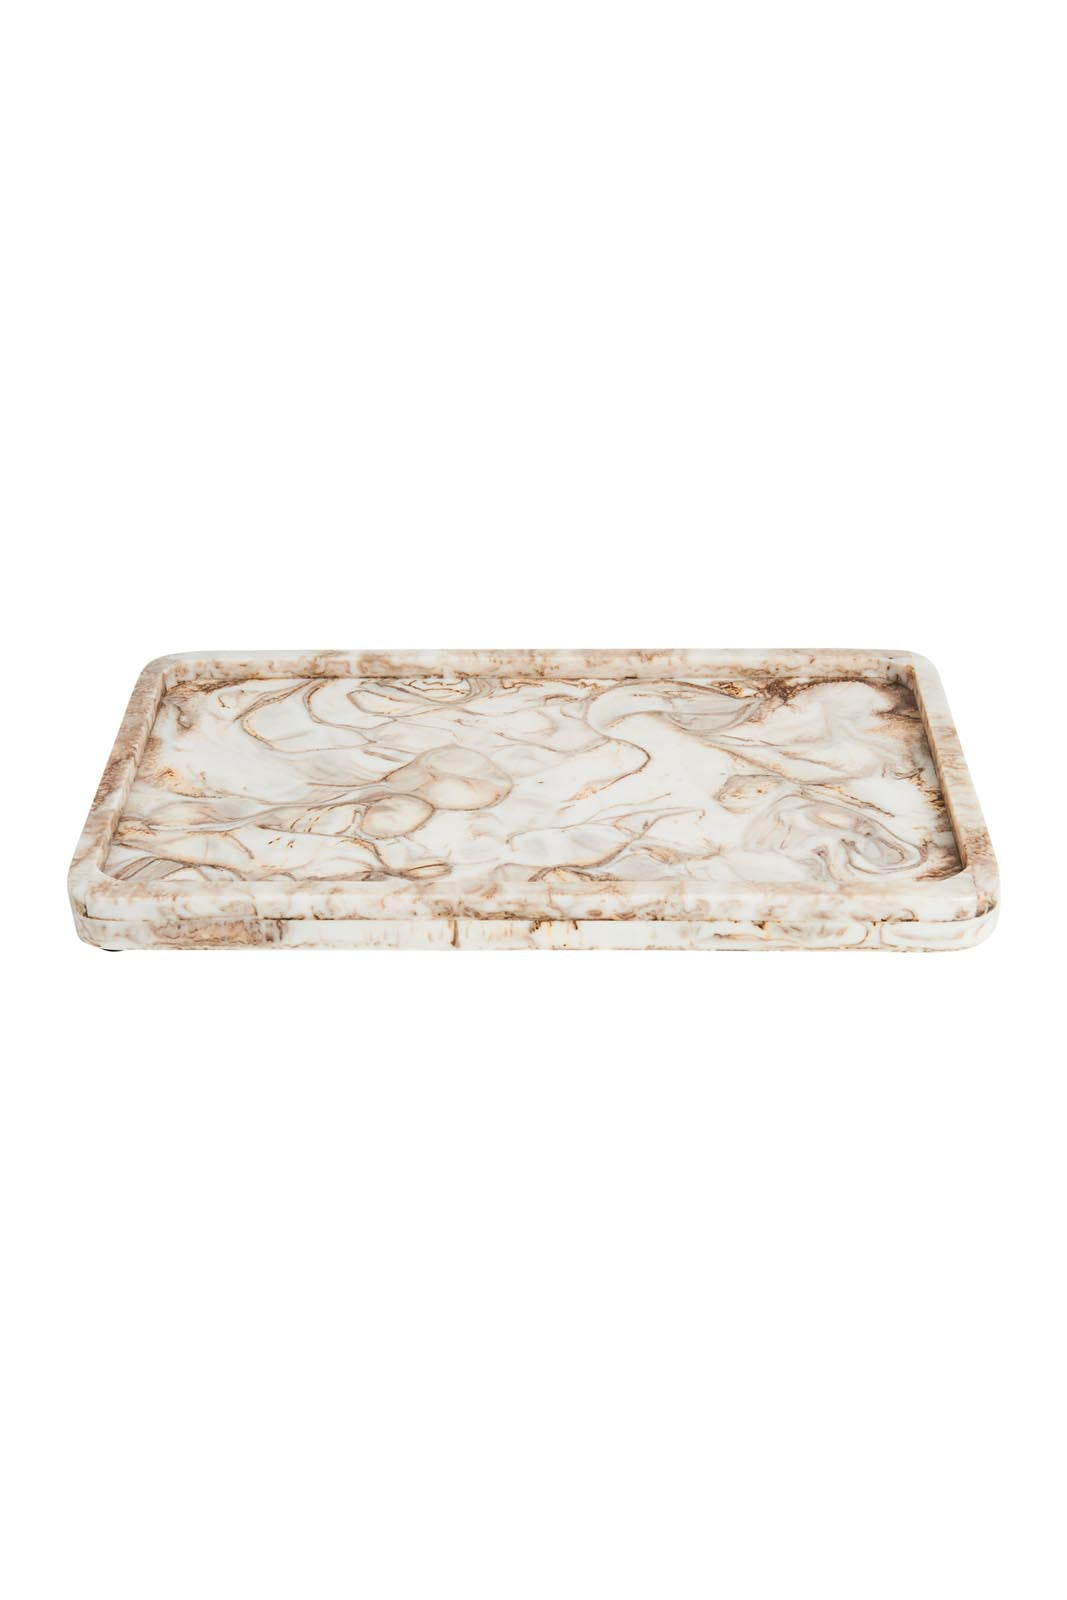 Marra Rectangle Platter - Creme - eb&ive Table Top